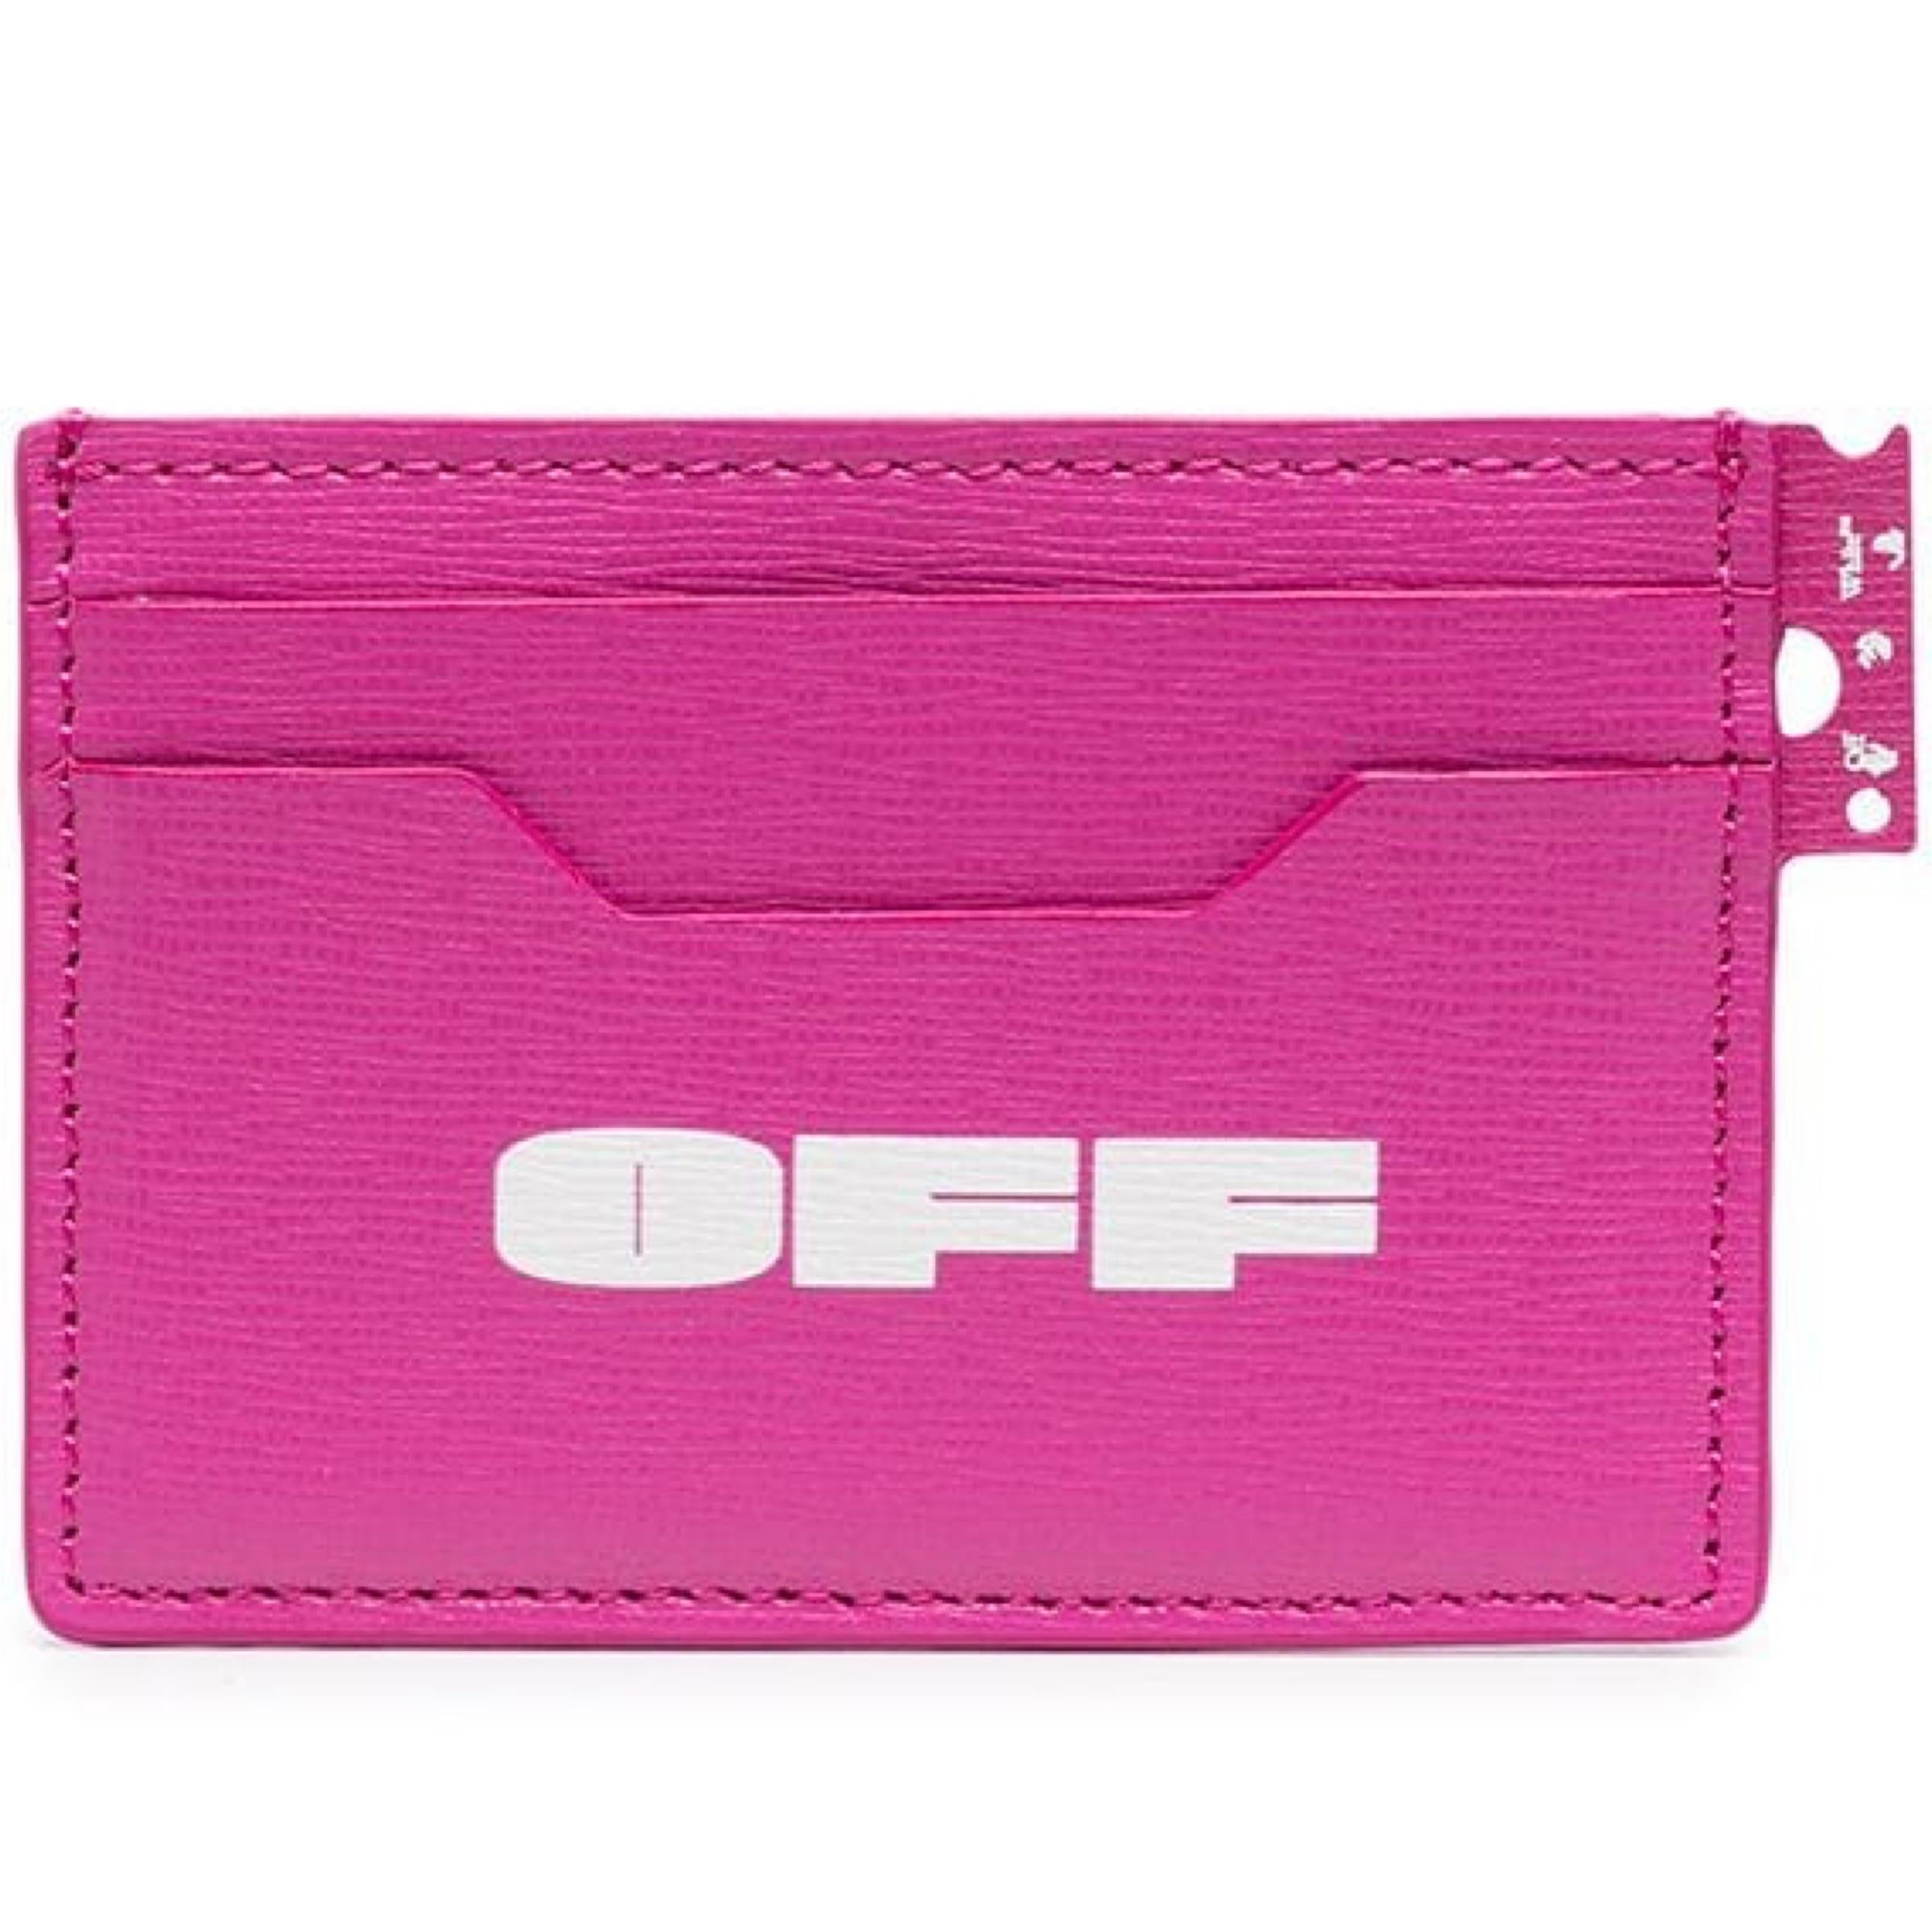 New Off-White Virgil Abloh Pink OFF Logo Leather Card Holder

Authenticity Guaranteed

DETAILS
Brand: Off-White Virgil Abloh
Gender: Unisex
Category: Card Holder
Condition: Brand new
Color: Pink
Material: Leather
Top Zip